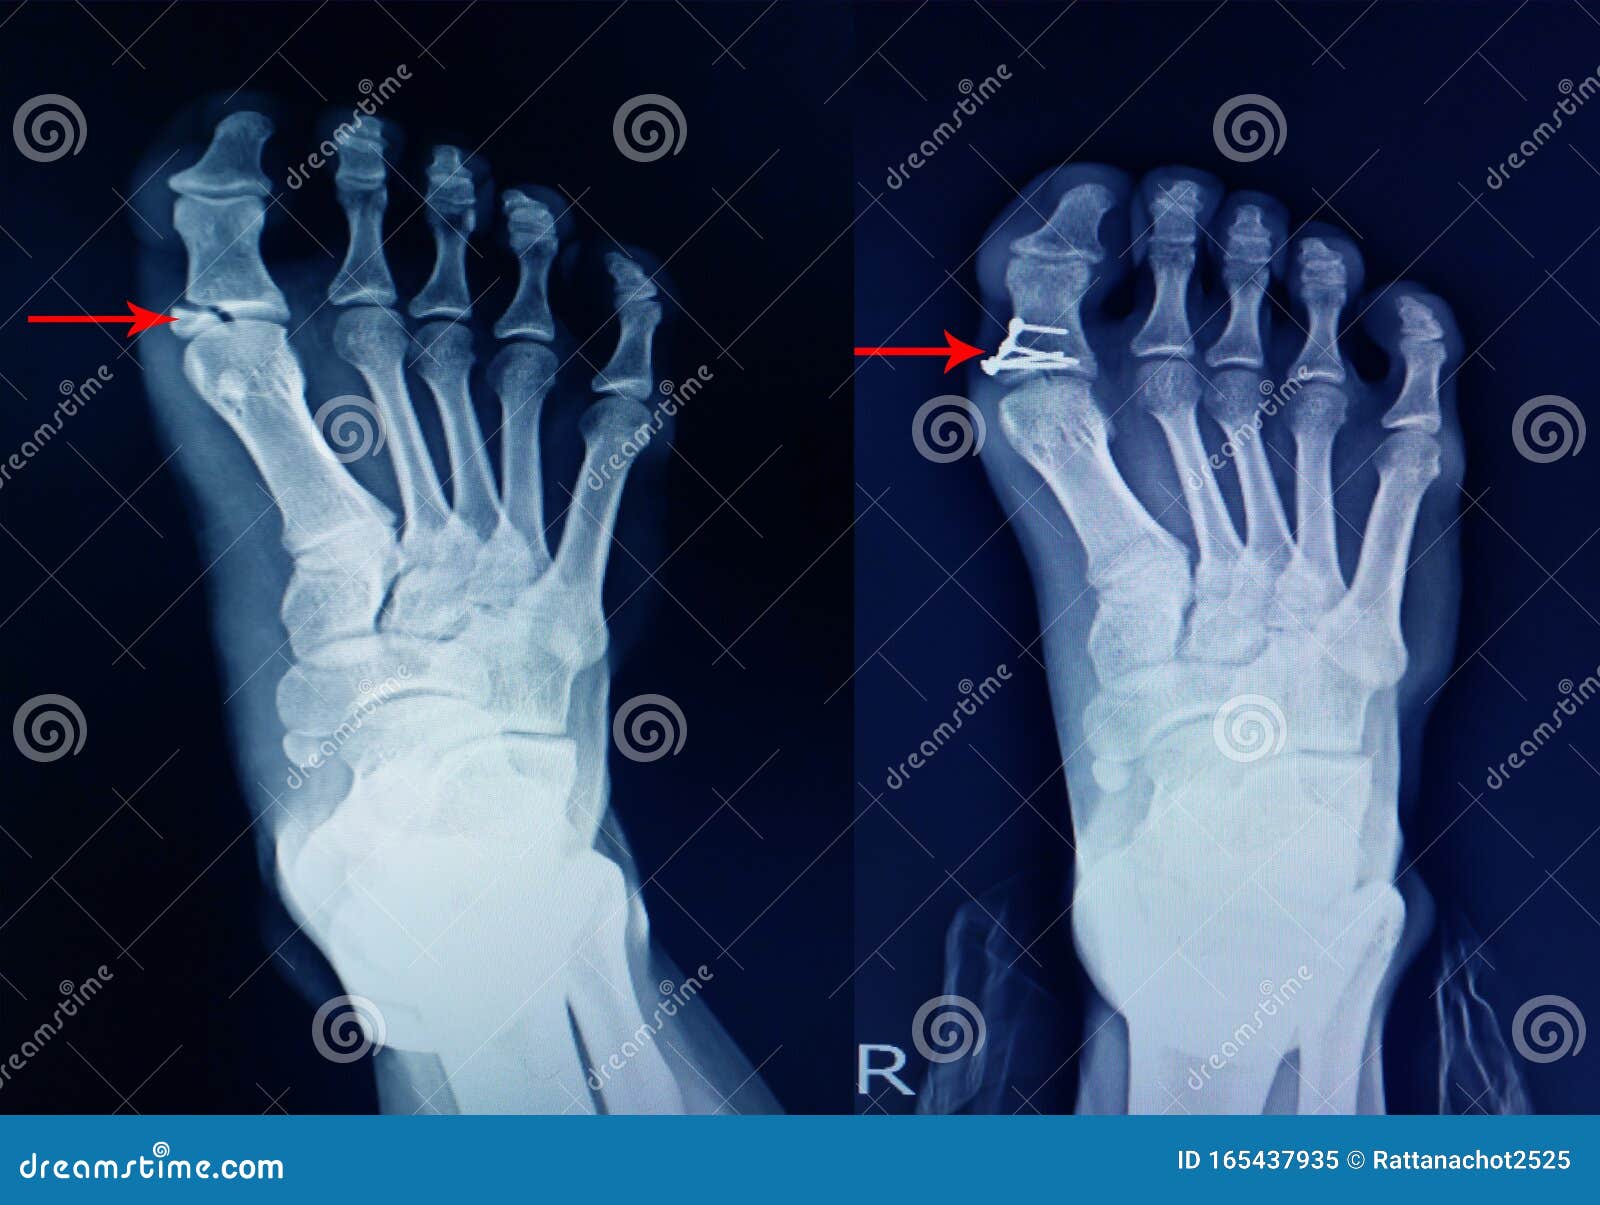 x-ray foot fracture proximal phalang and surgery fix mini plate and screws